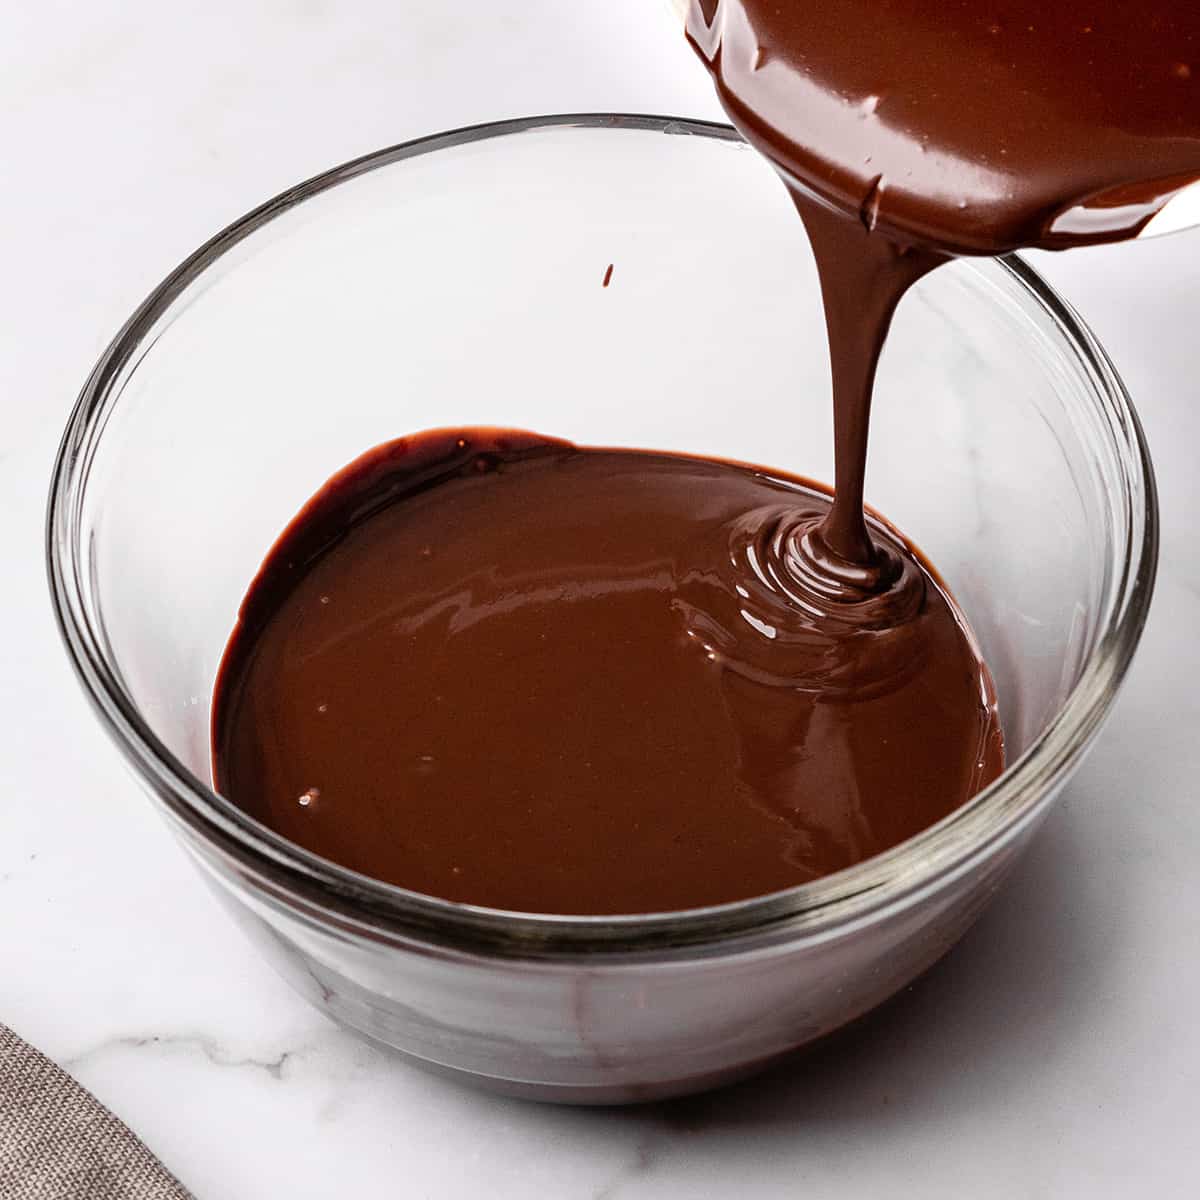 chocolate ganache being poured into a glass bowl